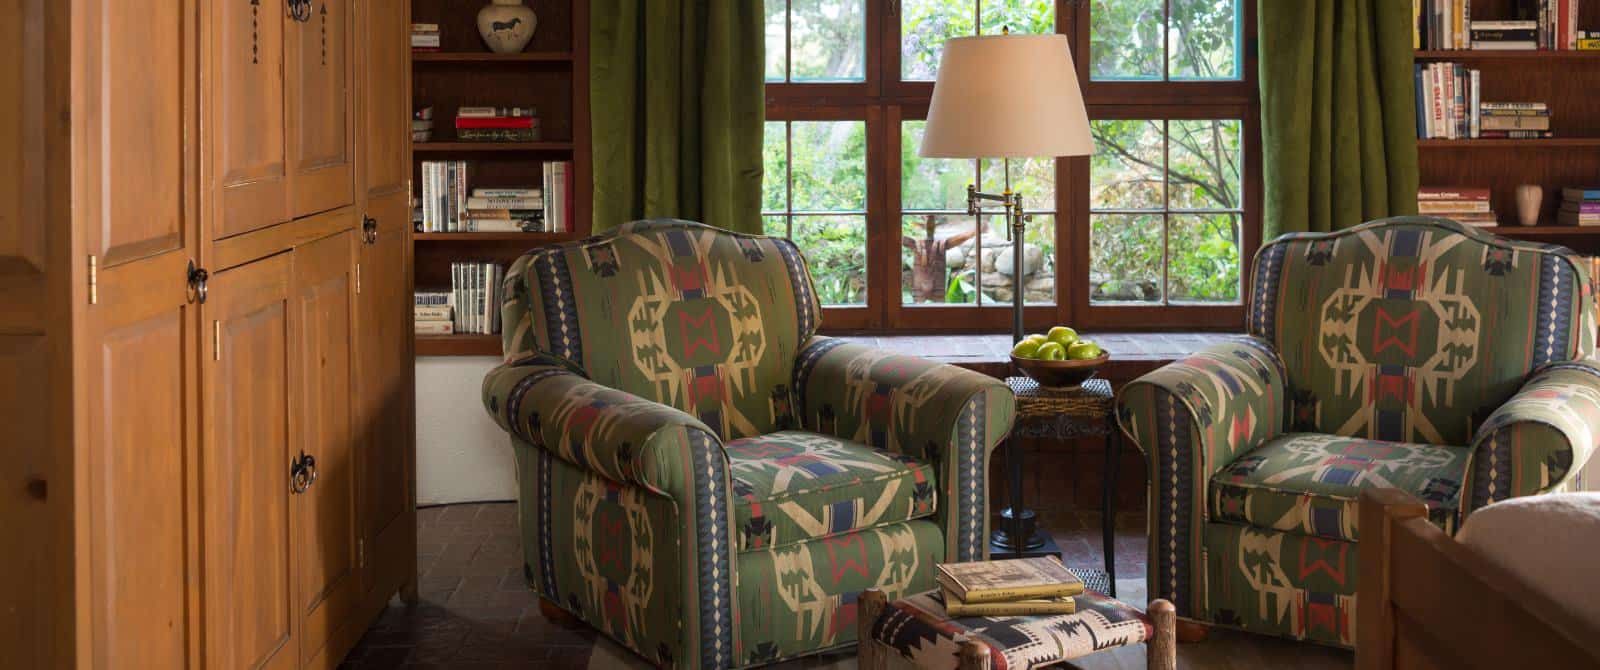 Two armchairs upholstered in Southwestern fabric in front of a wooden-framed window and built-in bookcases.